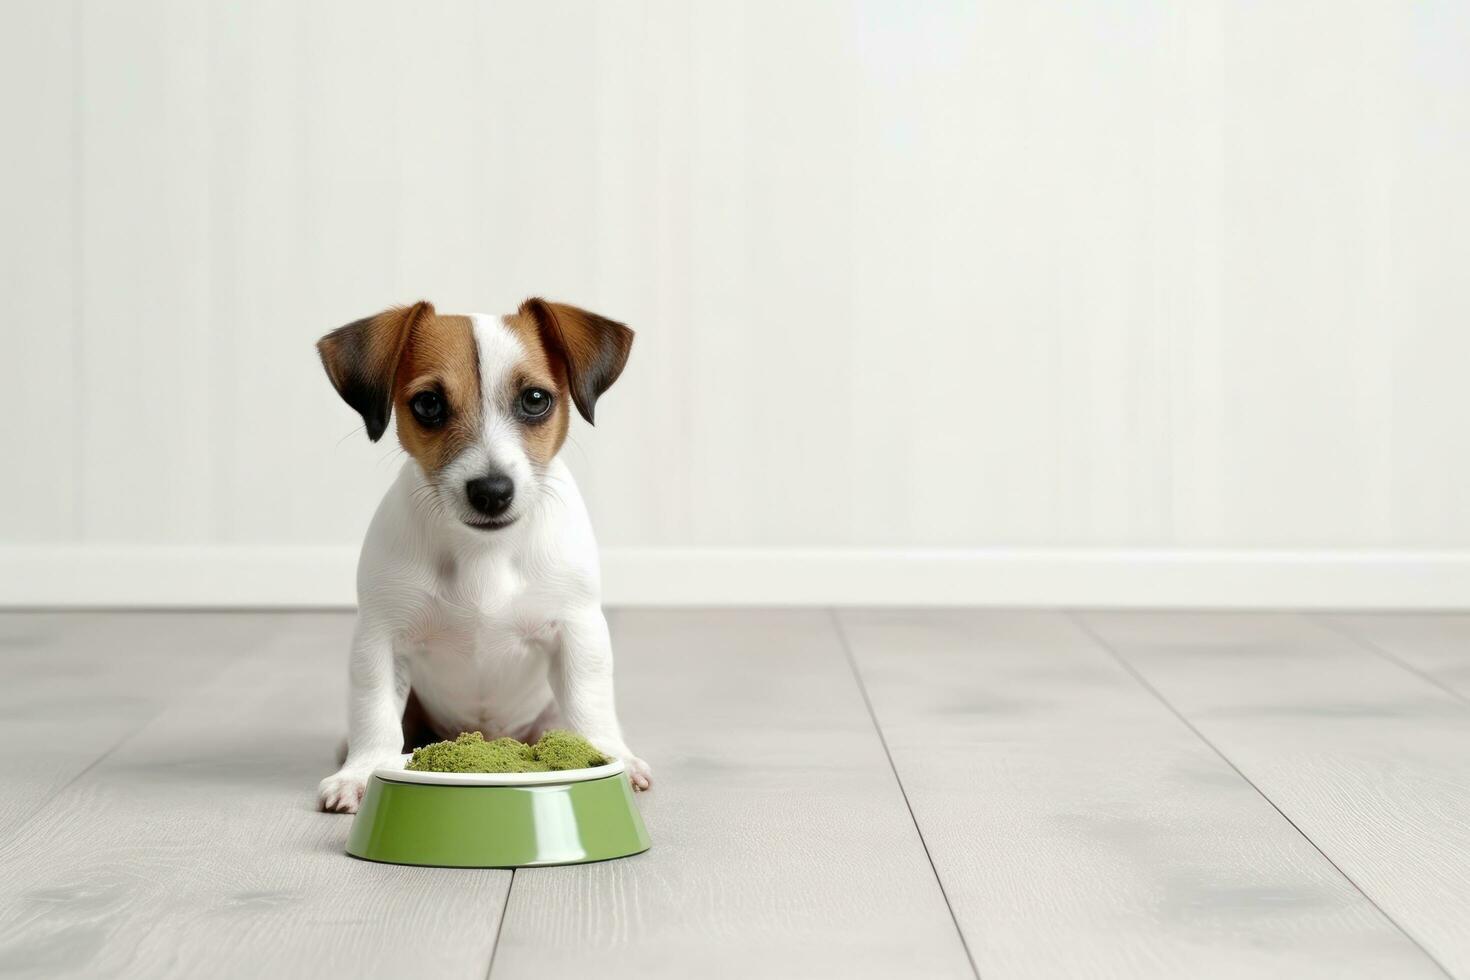 dog in a white sweater eats food from a green bowl on a gray floor photo